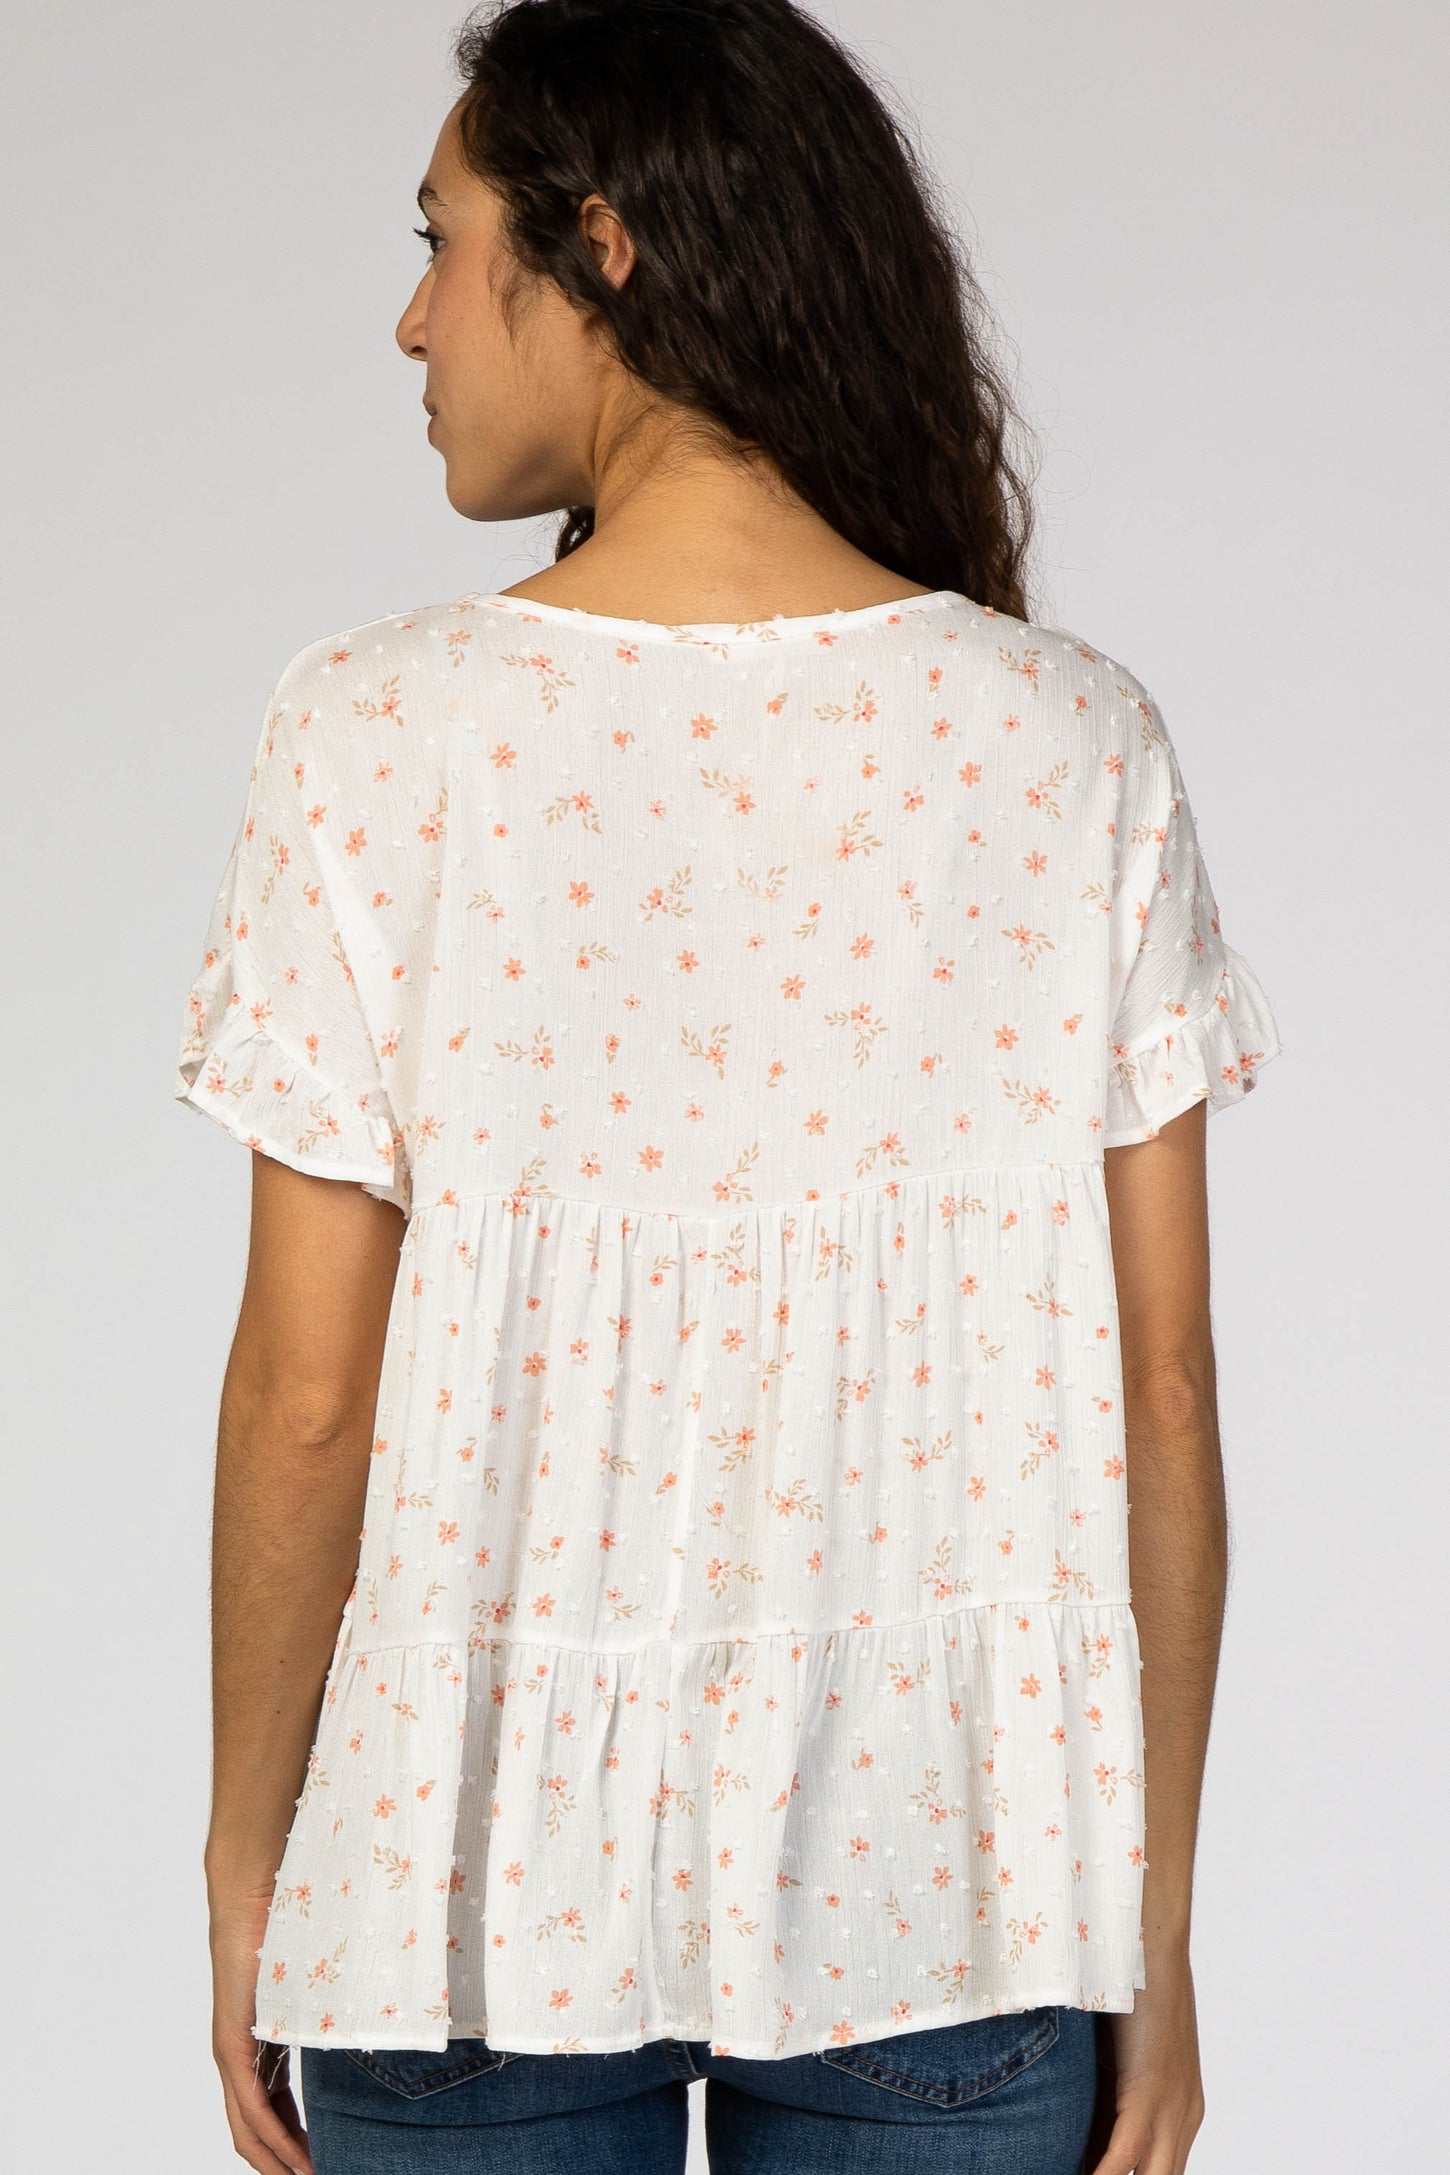 Ivory Floral Swiss Dot Tiered Top